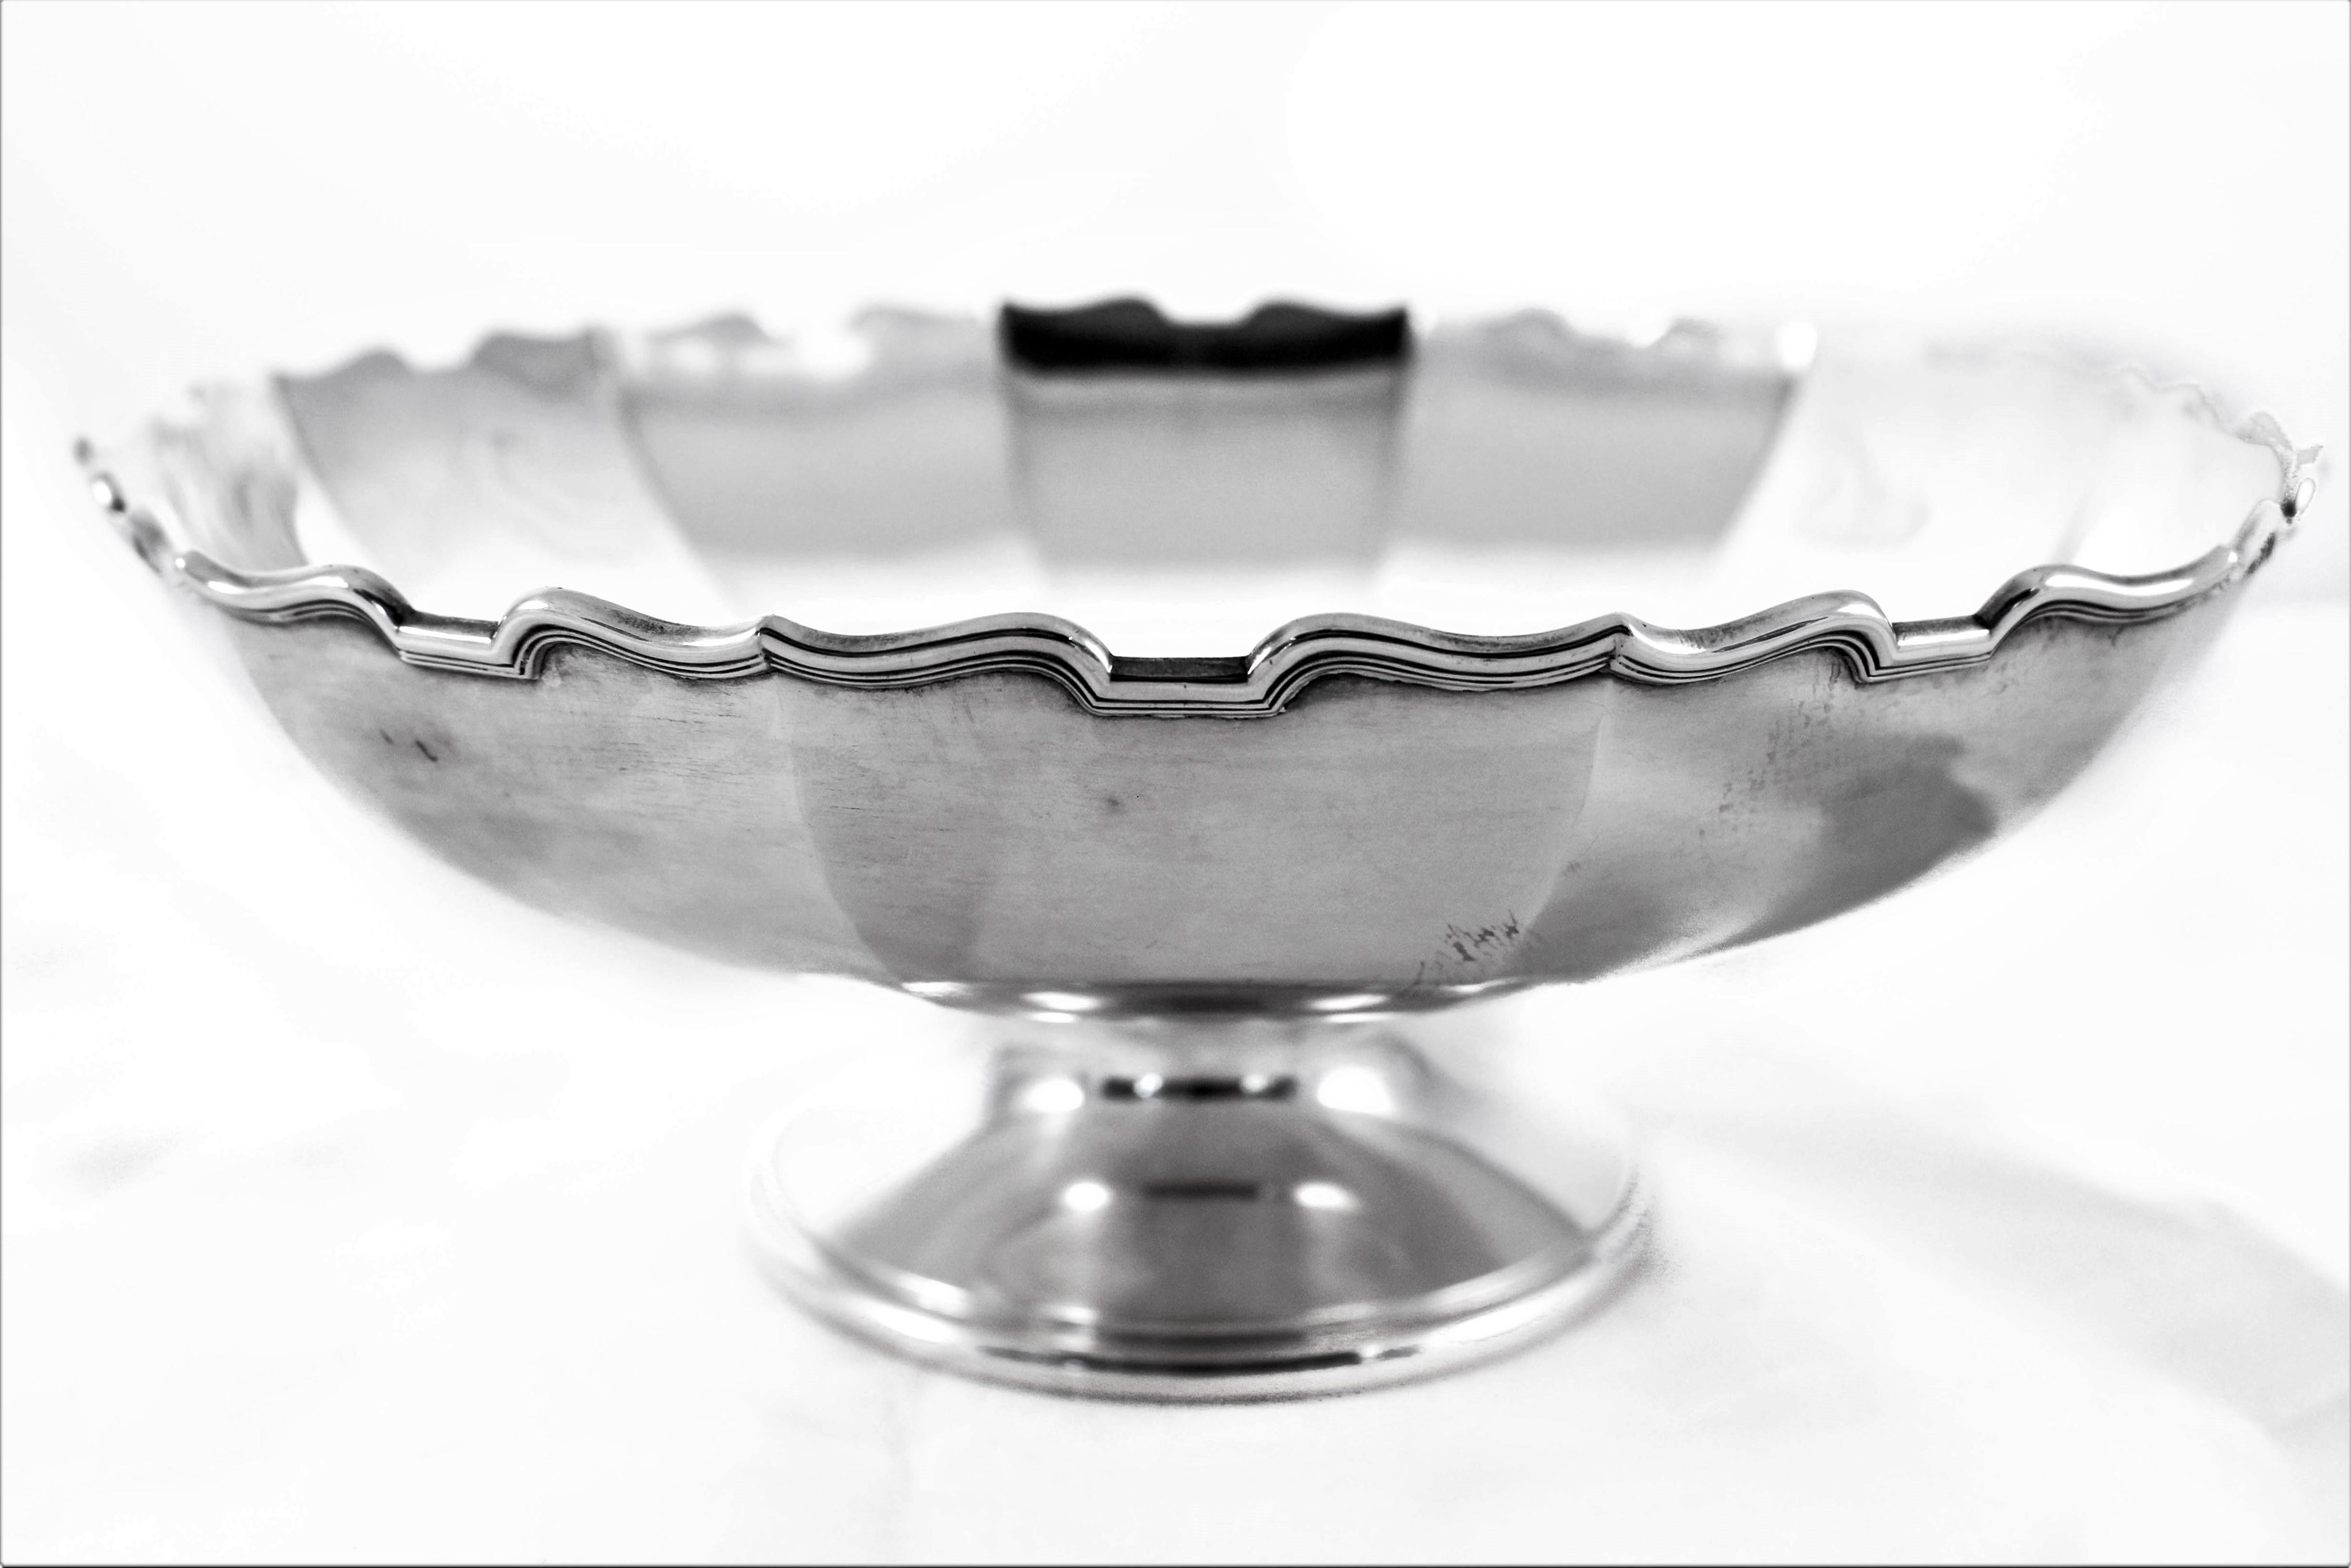 Proud to offer this regal sterling bowl on a pedestal (not weighted). It has a simple yet elegant style. A scalloped rim with a panel-like design around the body. The perfect size and height for the centre of a breakfast table, filled with apples or